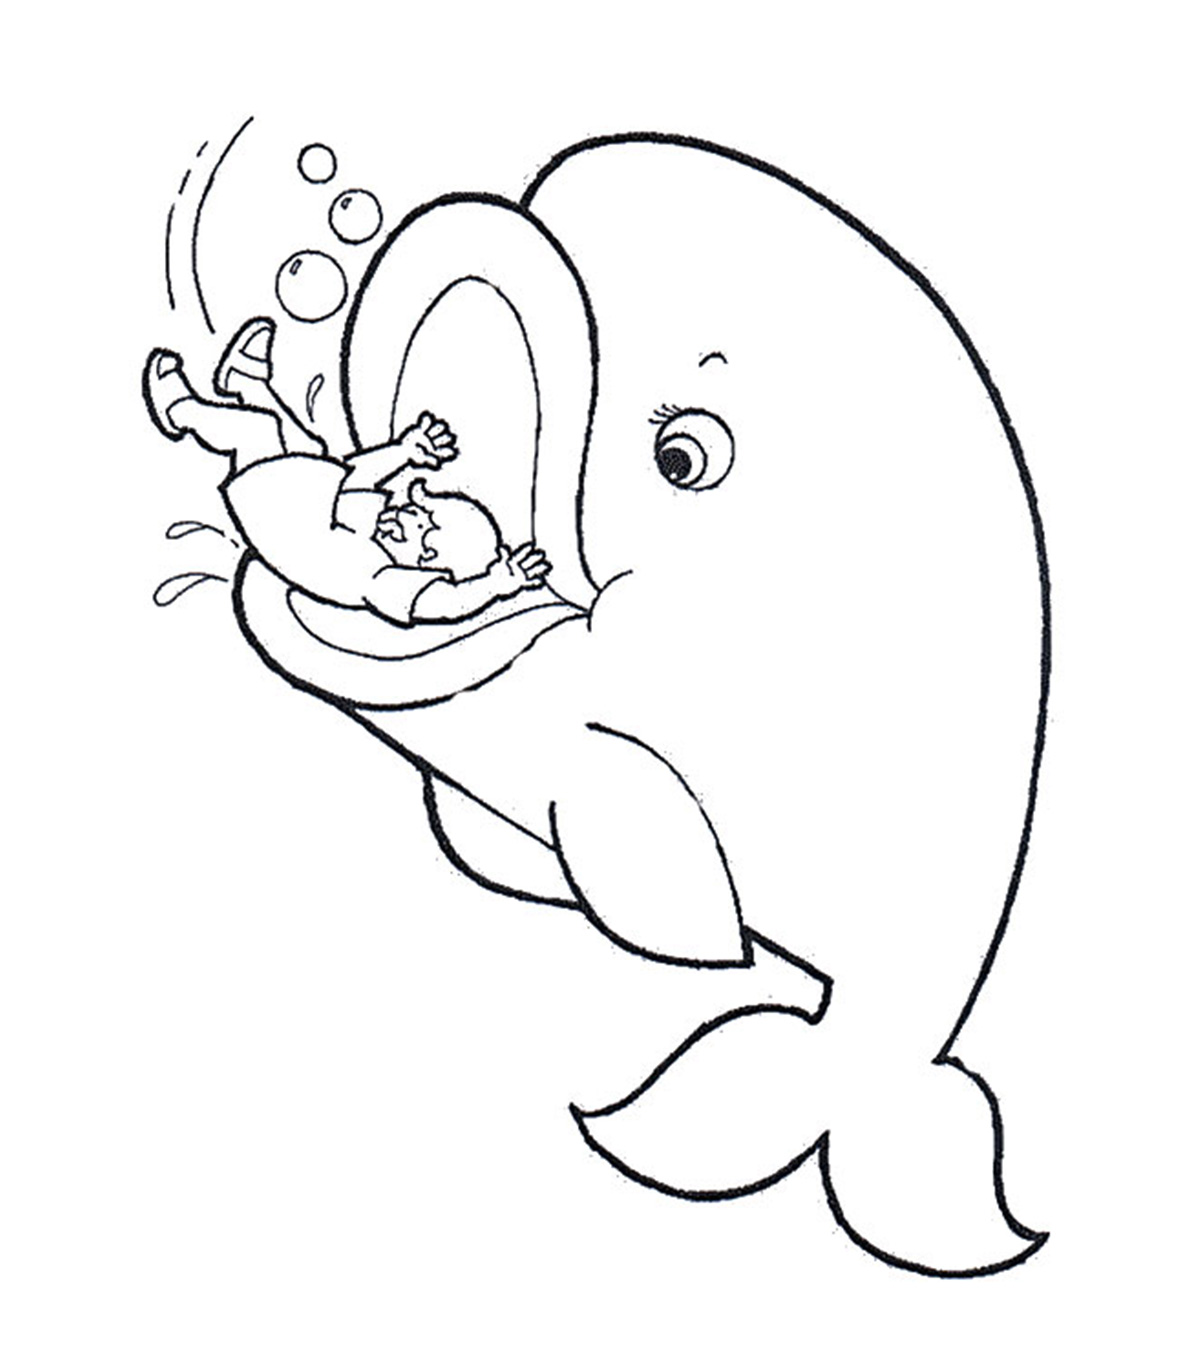 10 Best Free Printable Jonah And The Whale Coloring Pages